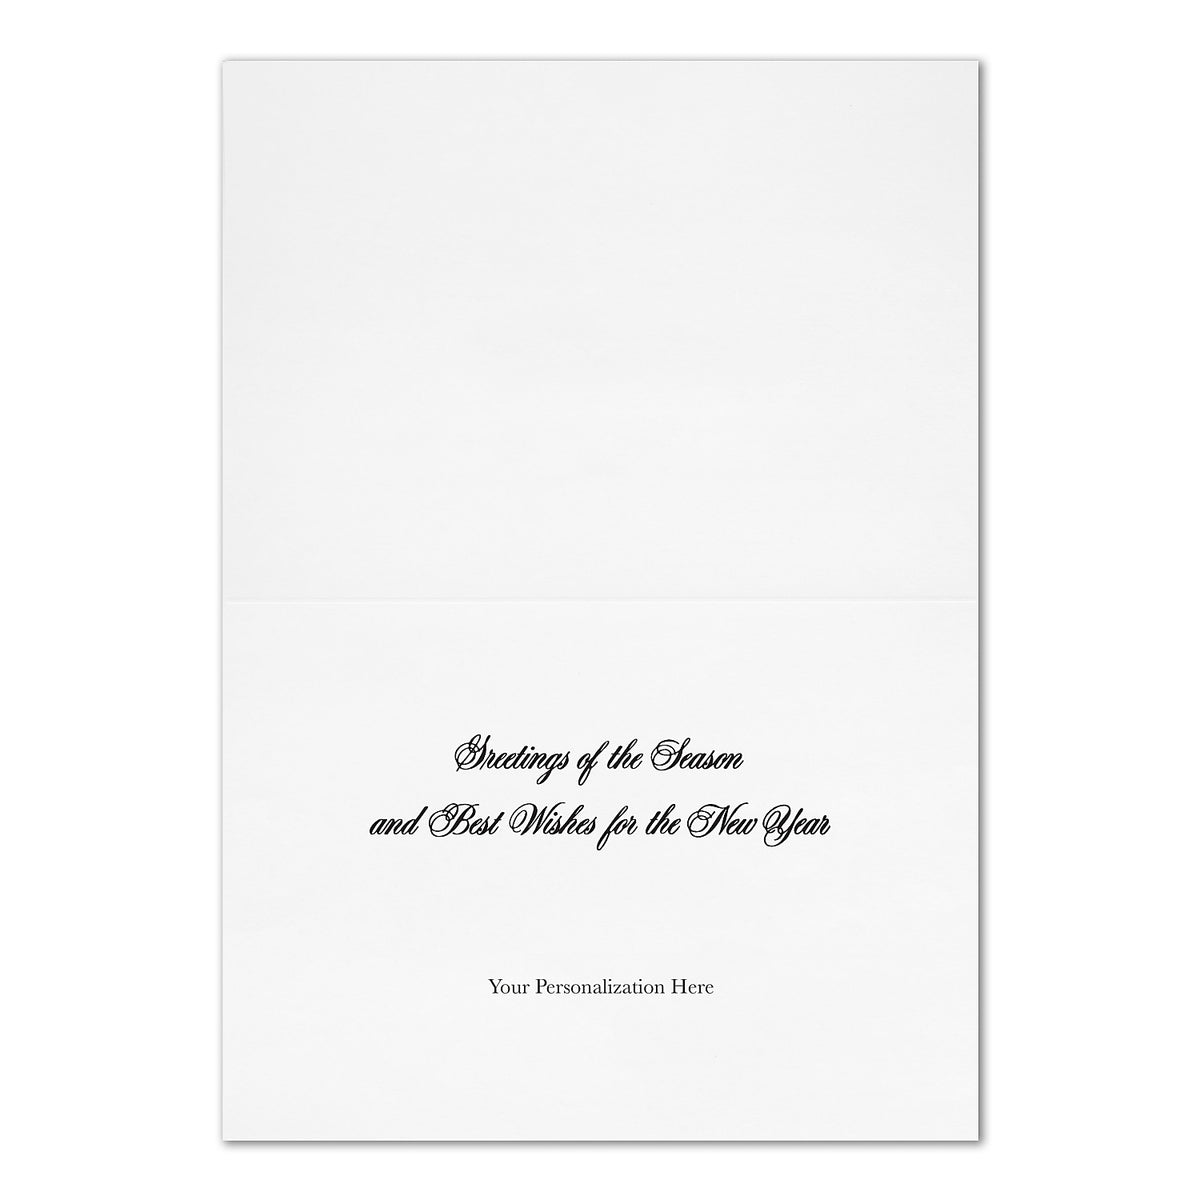 "Elegant Image" Holiday Card w/ Fastick Silver Lined White Envelope, 25/BX